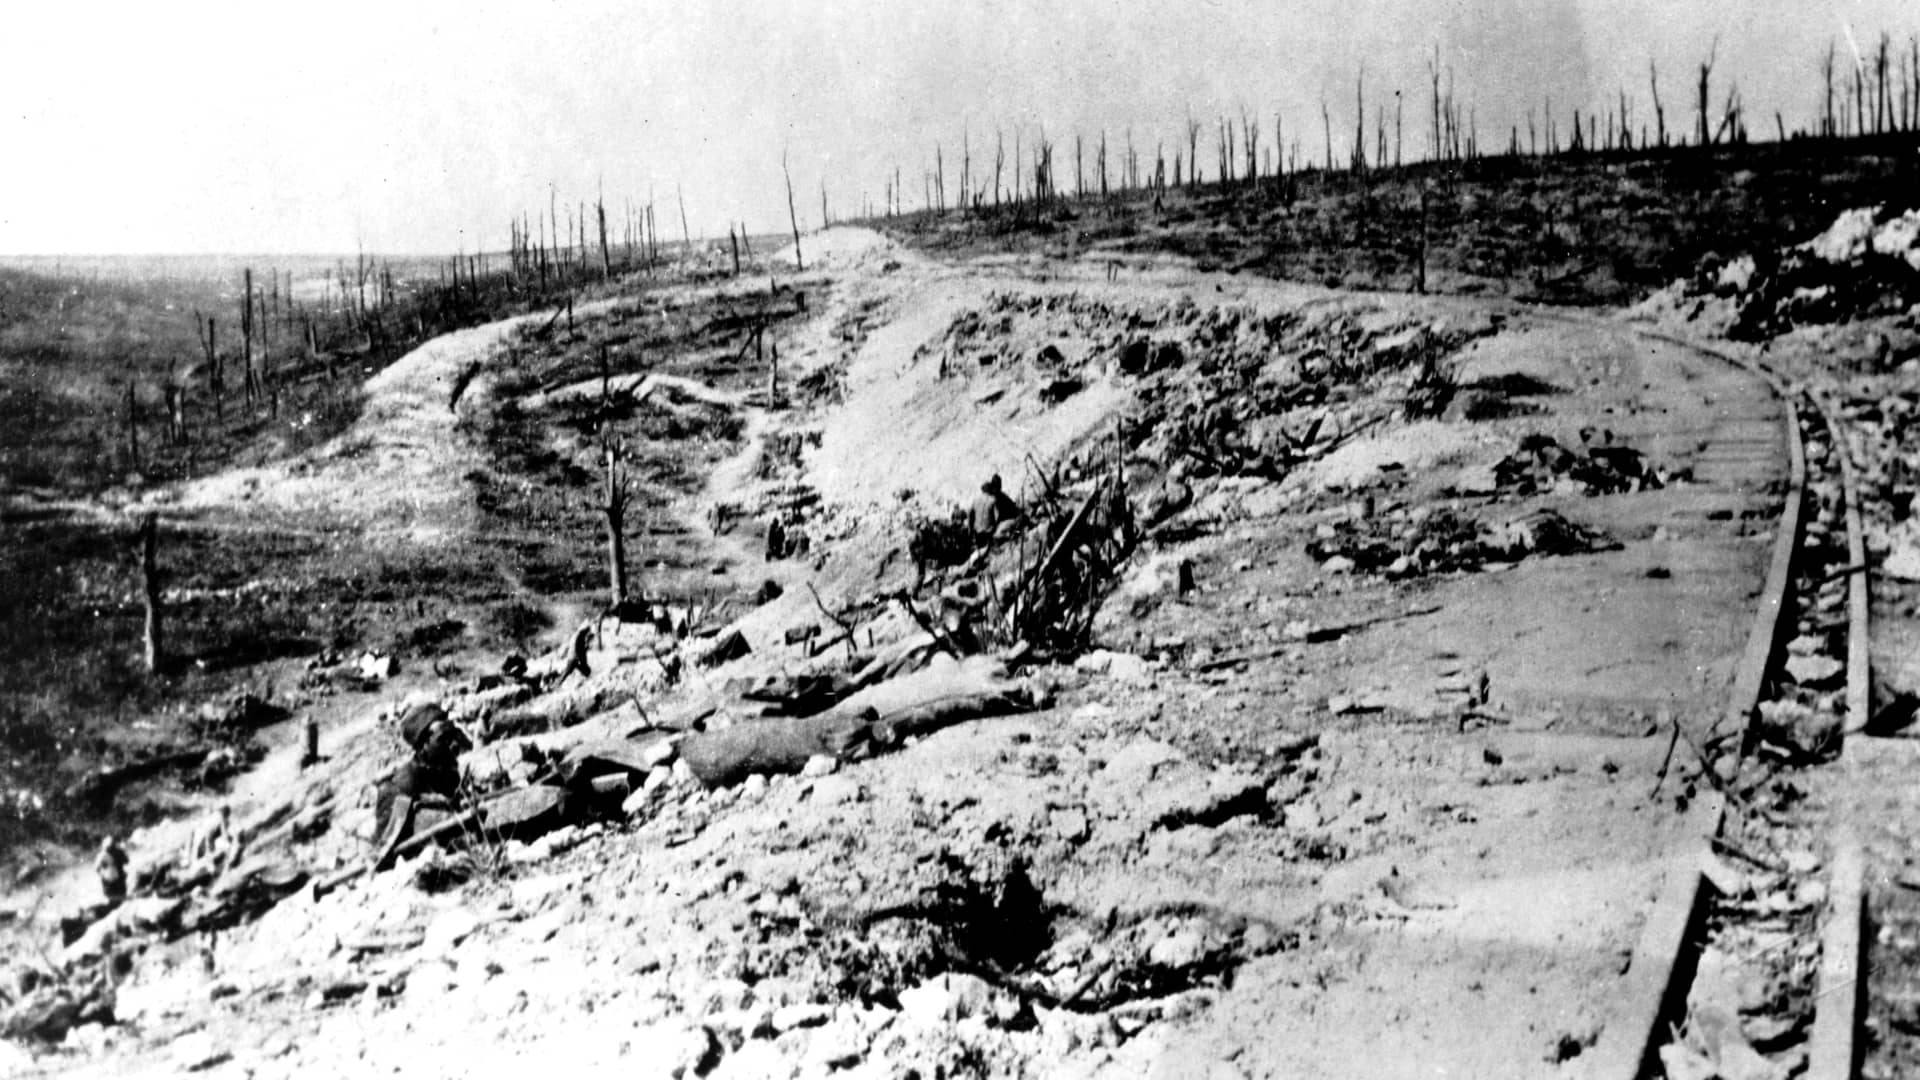 Douaumont railroad: the death ravine between the Fortresses of Douaumont and Vaux during the Battle of Verdun in 1916.